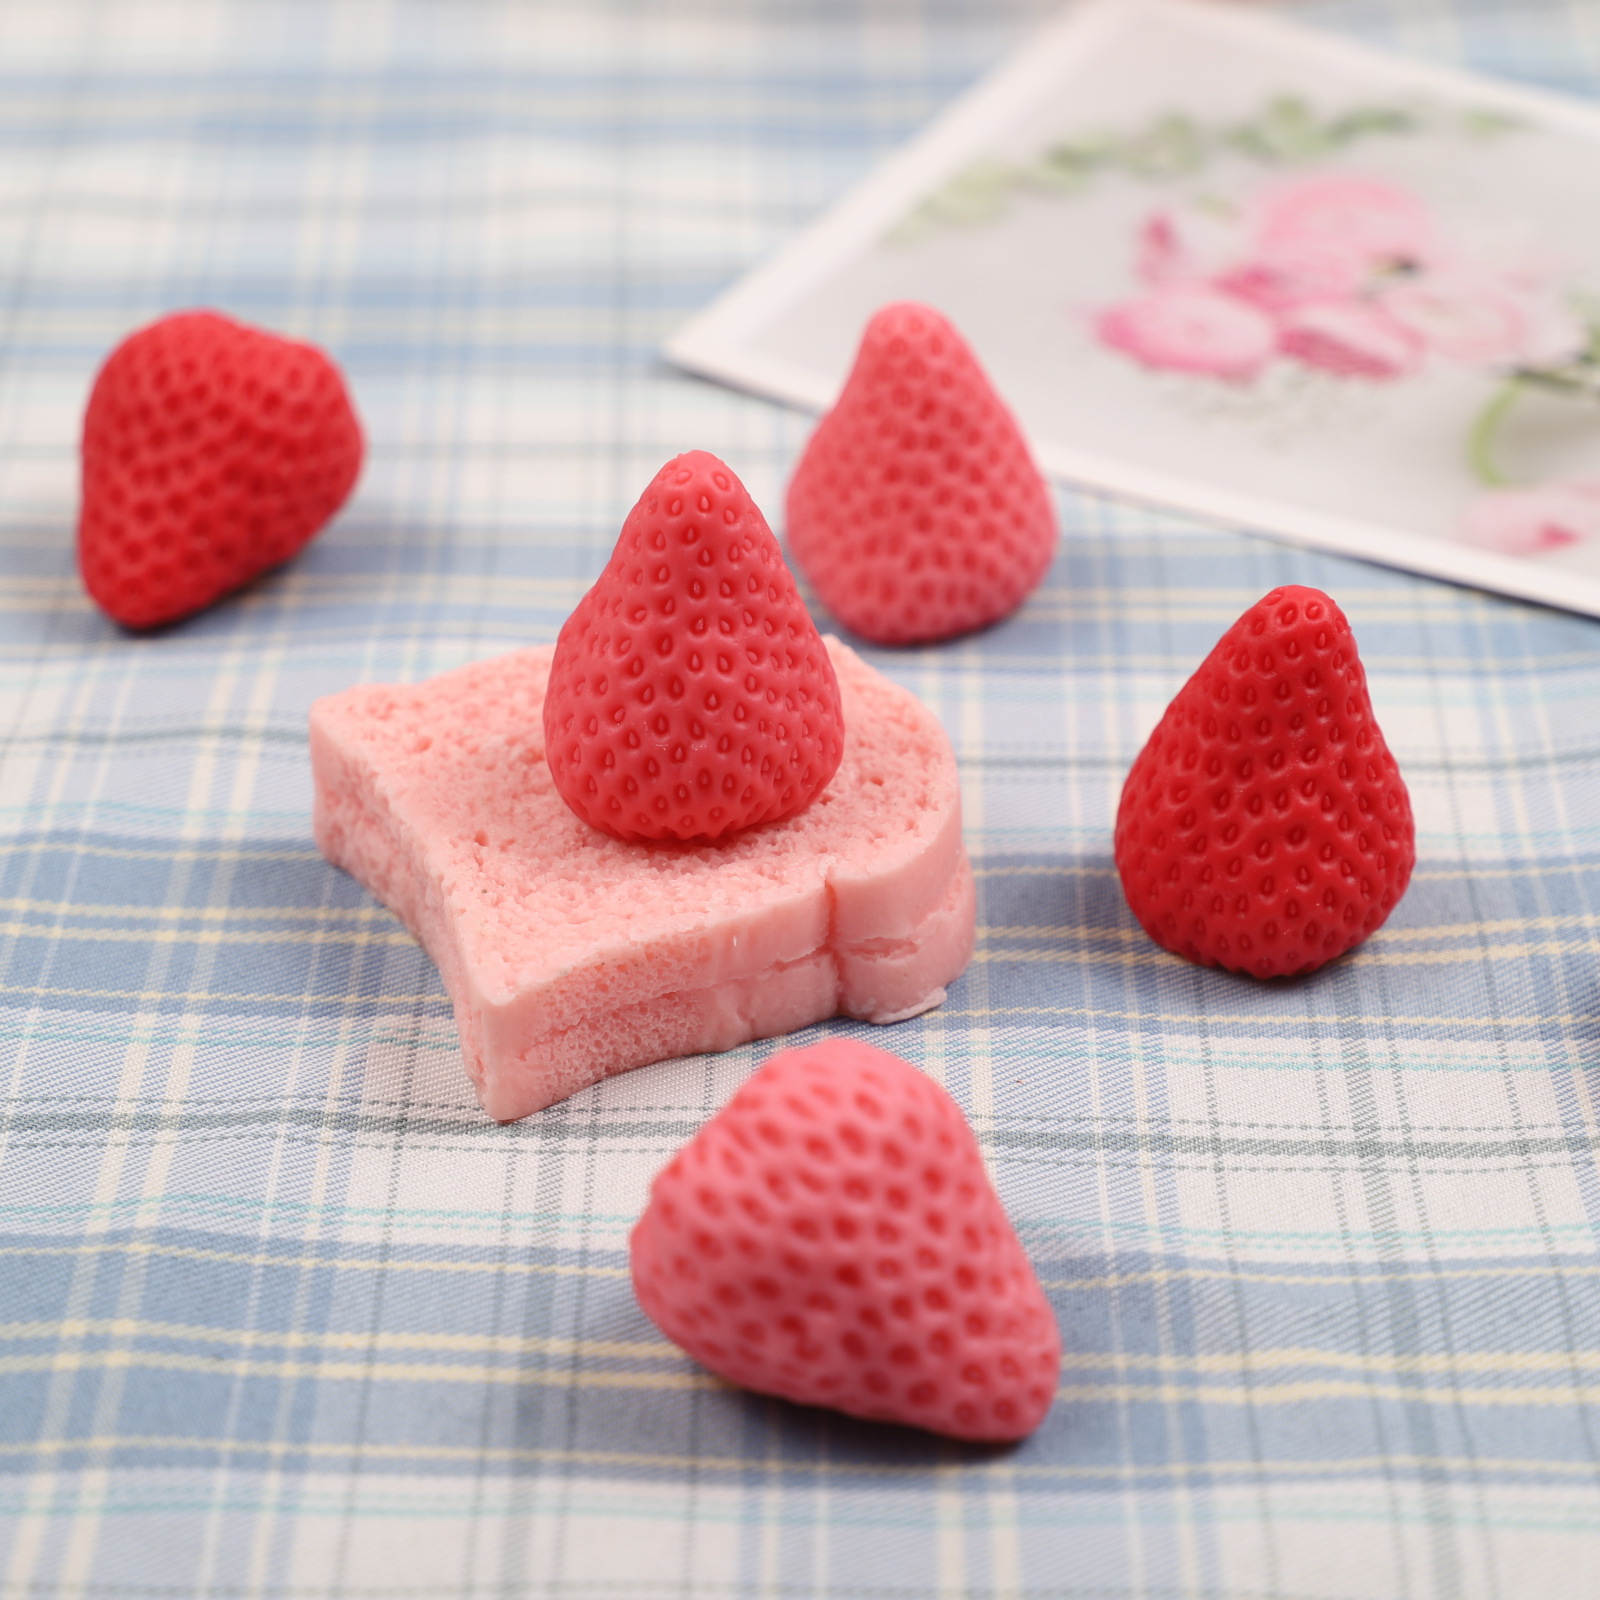 3D Strawberry Silicone Mold (4 Cavity), Fruit Mould